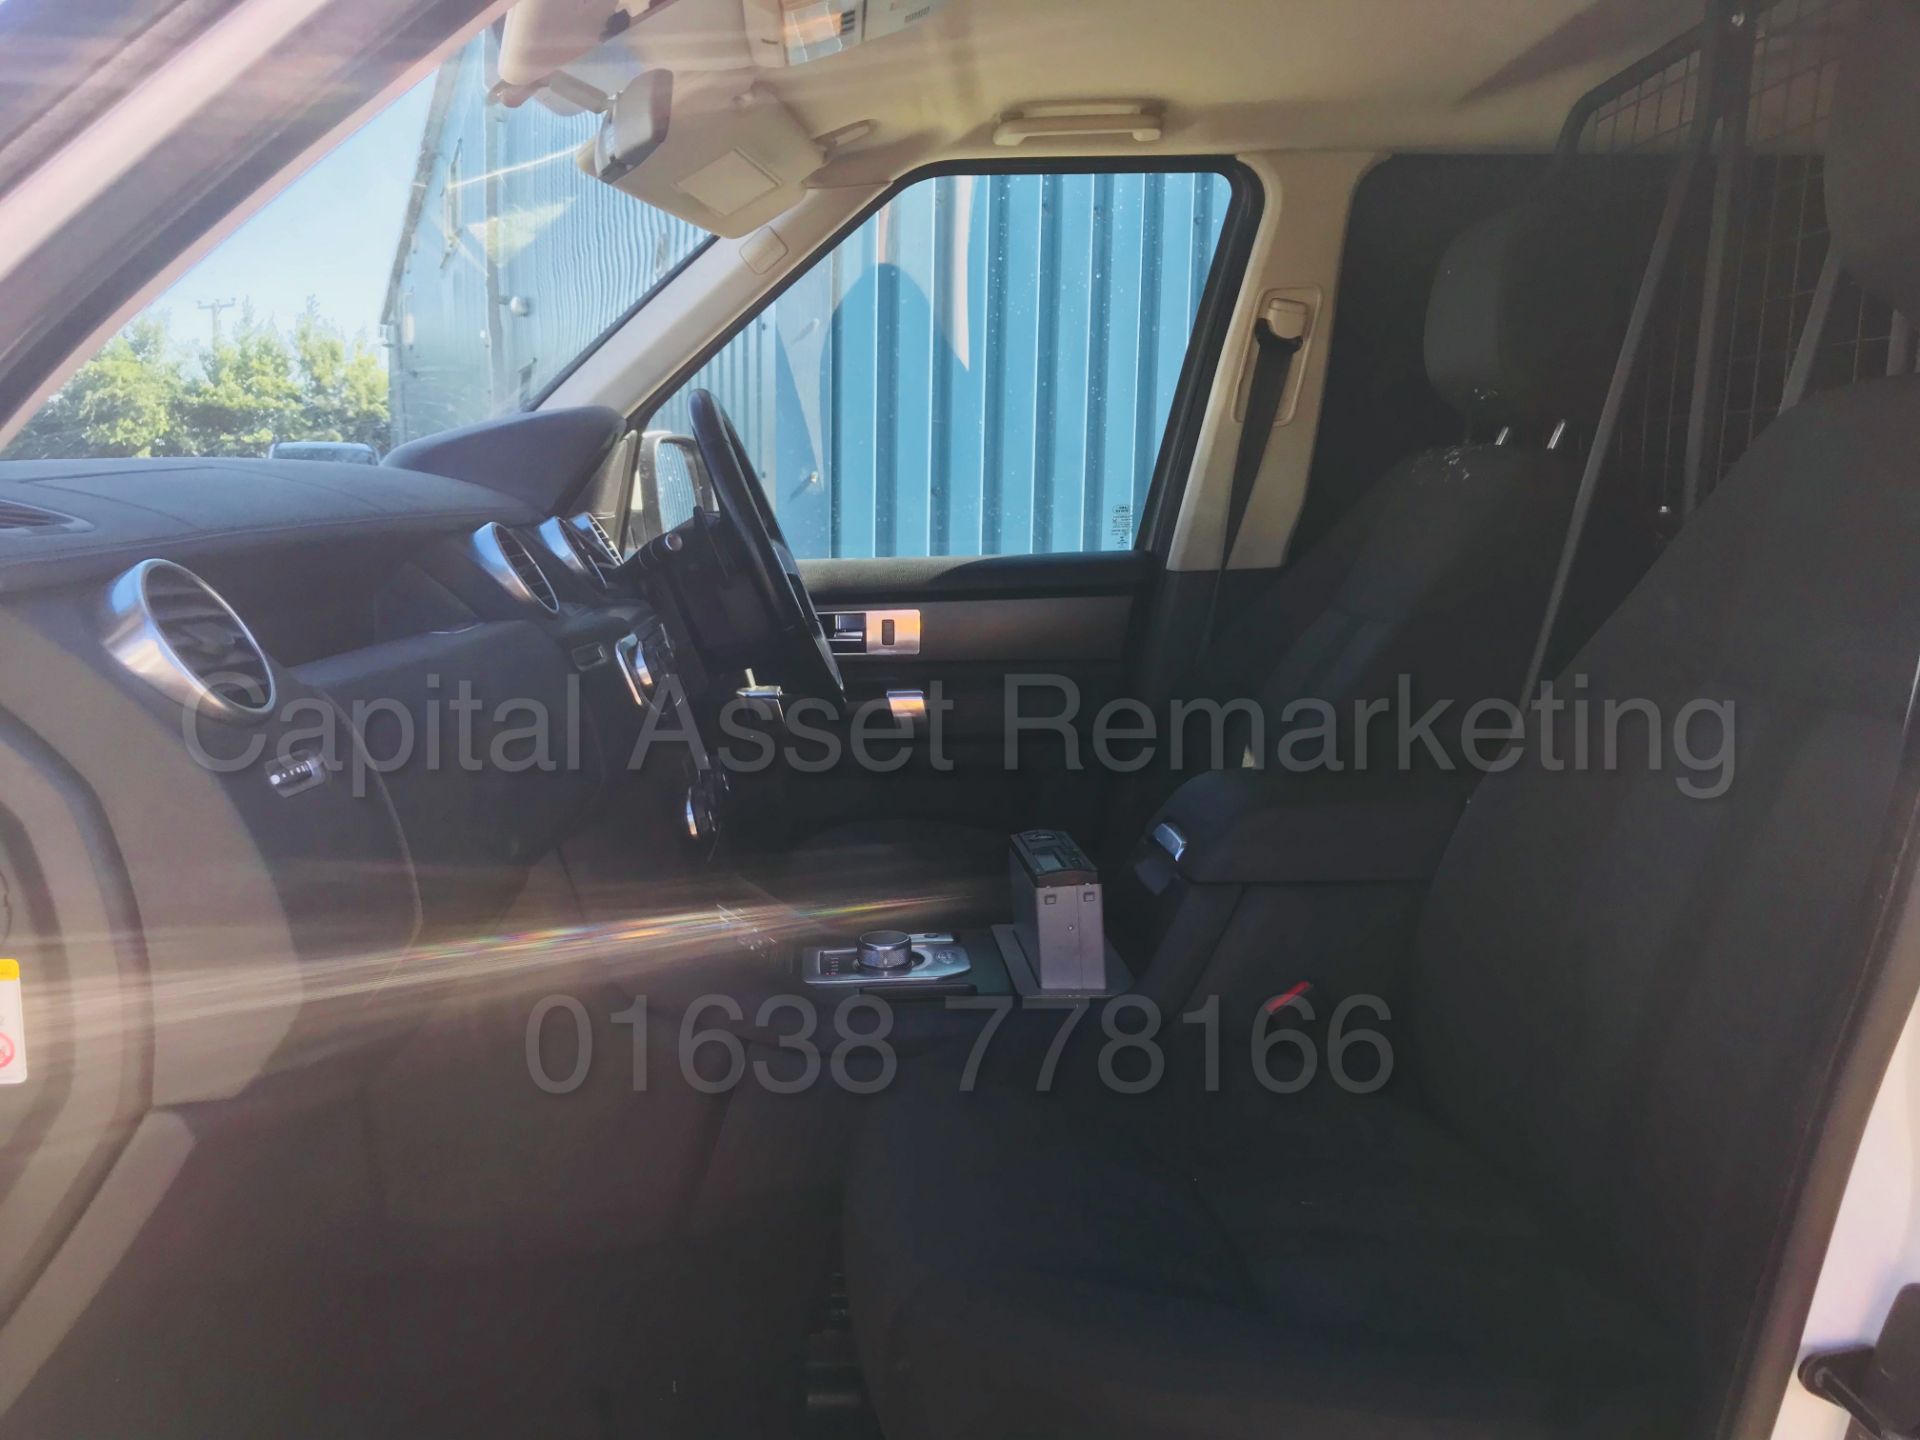 (On Sale) LAND ROVER DISCOVERY 4 **COMMERCIAL VAN**(2013 - 13 REG) '3.0 TDV6 - 210 BHP - AUTO' - Image 19 of 38